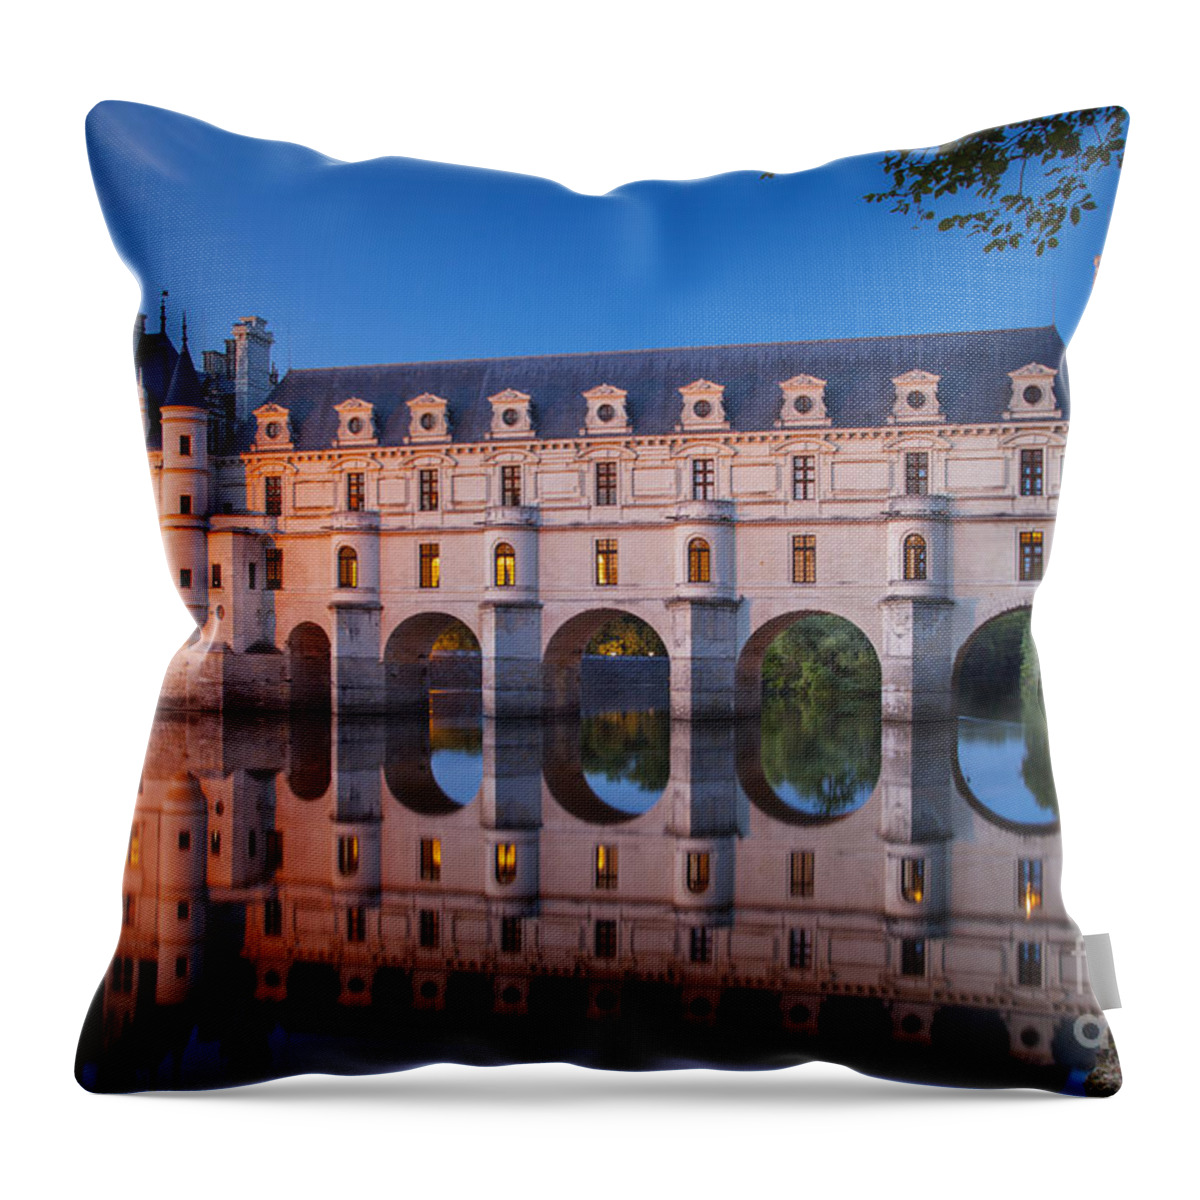 Chateau Chenonceau Throw Pillow featuring the photograph Chateau Chenonceau Night - Loire Valley France by Brian Jannsen